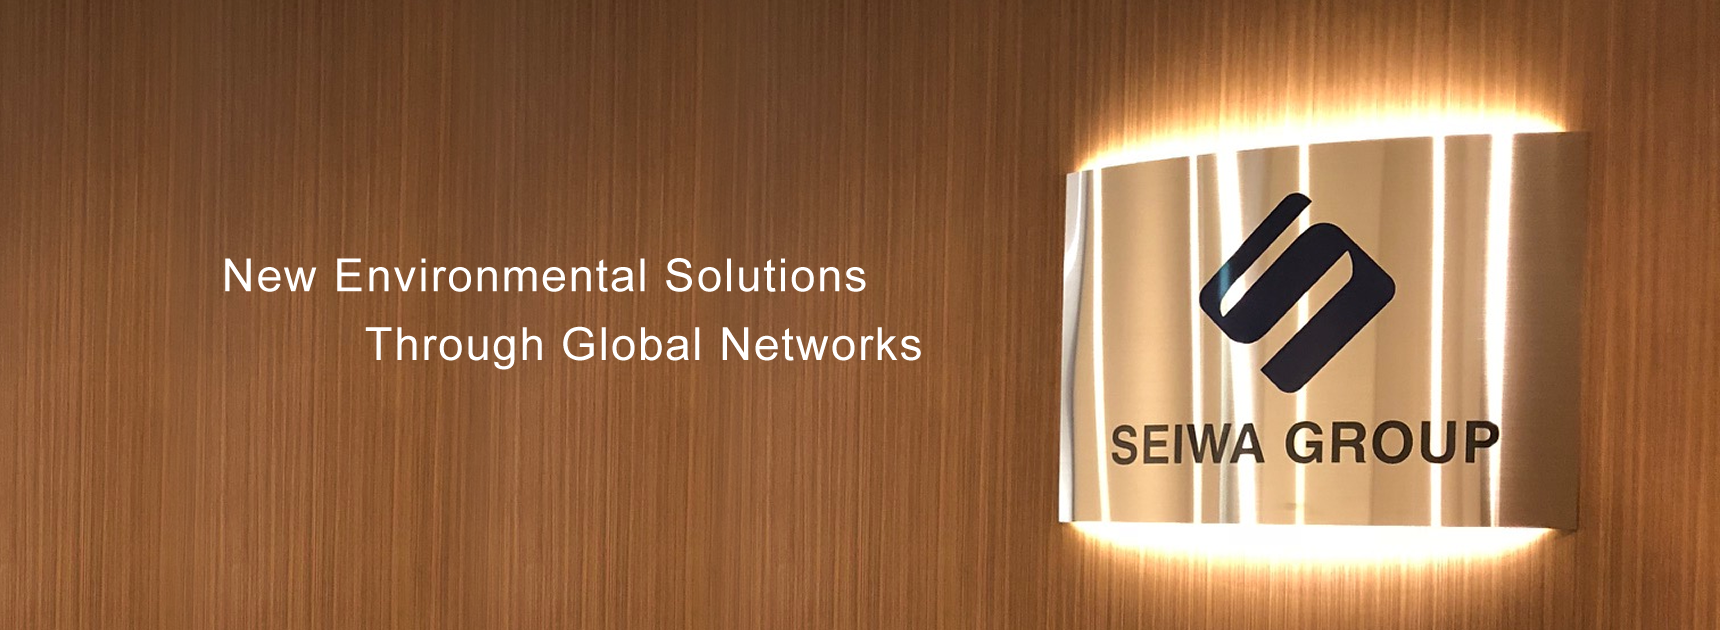 New Environmental Solution Through Global Networks